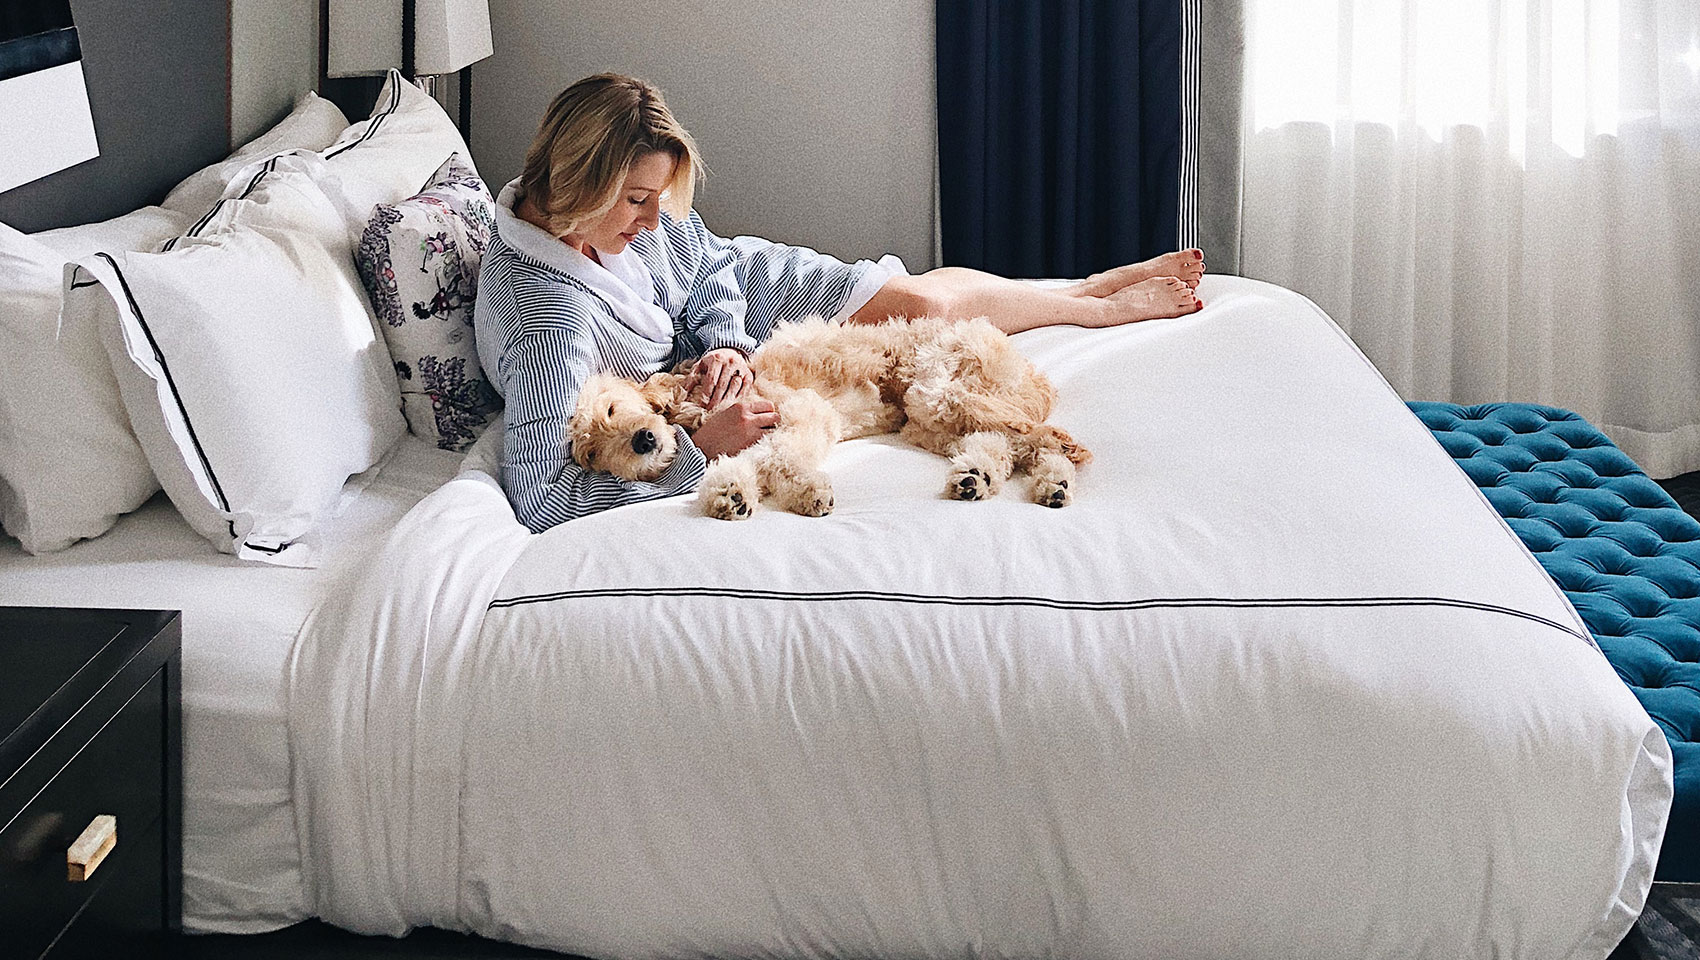 guest on cardinal king bed with dog